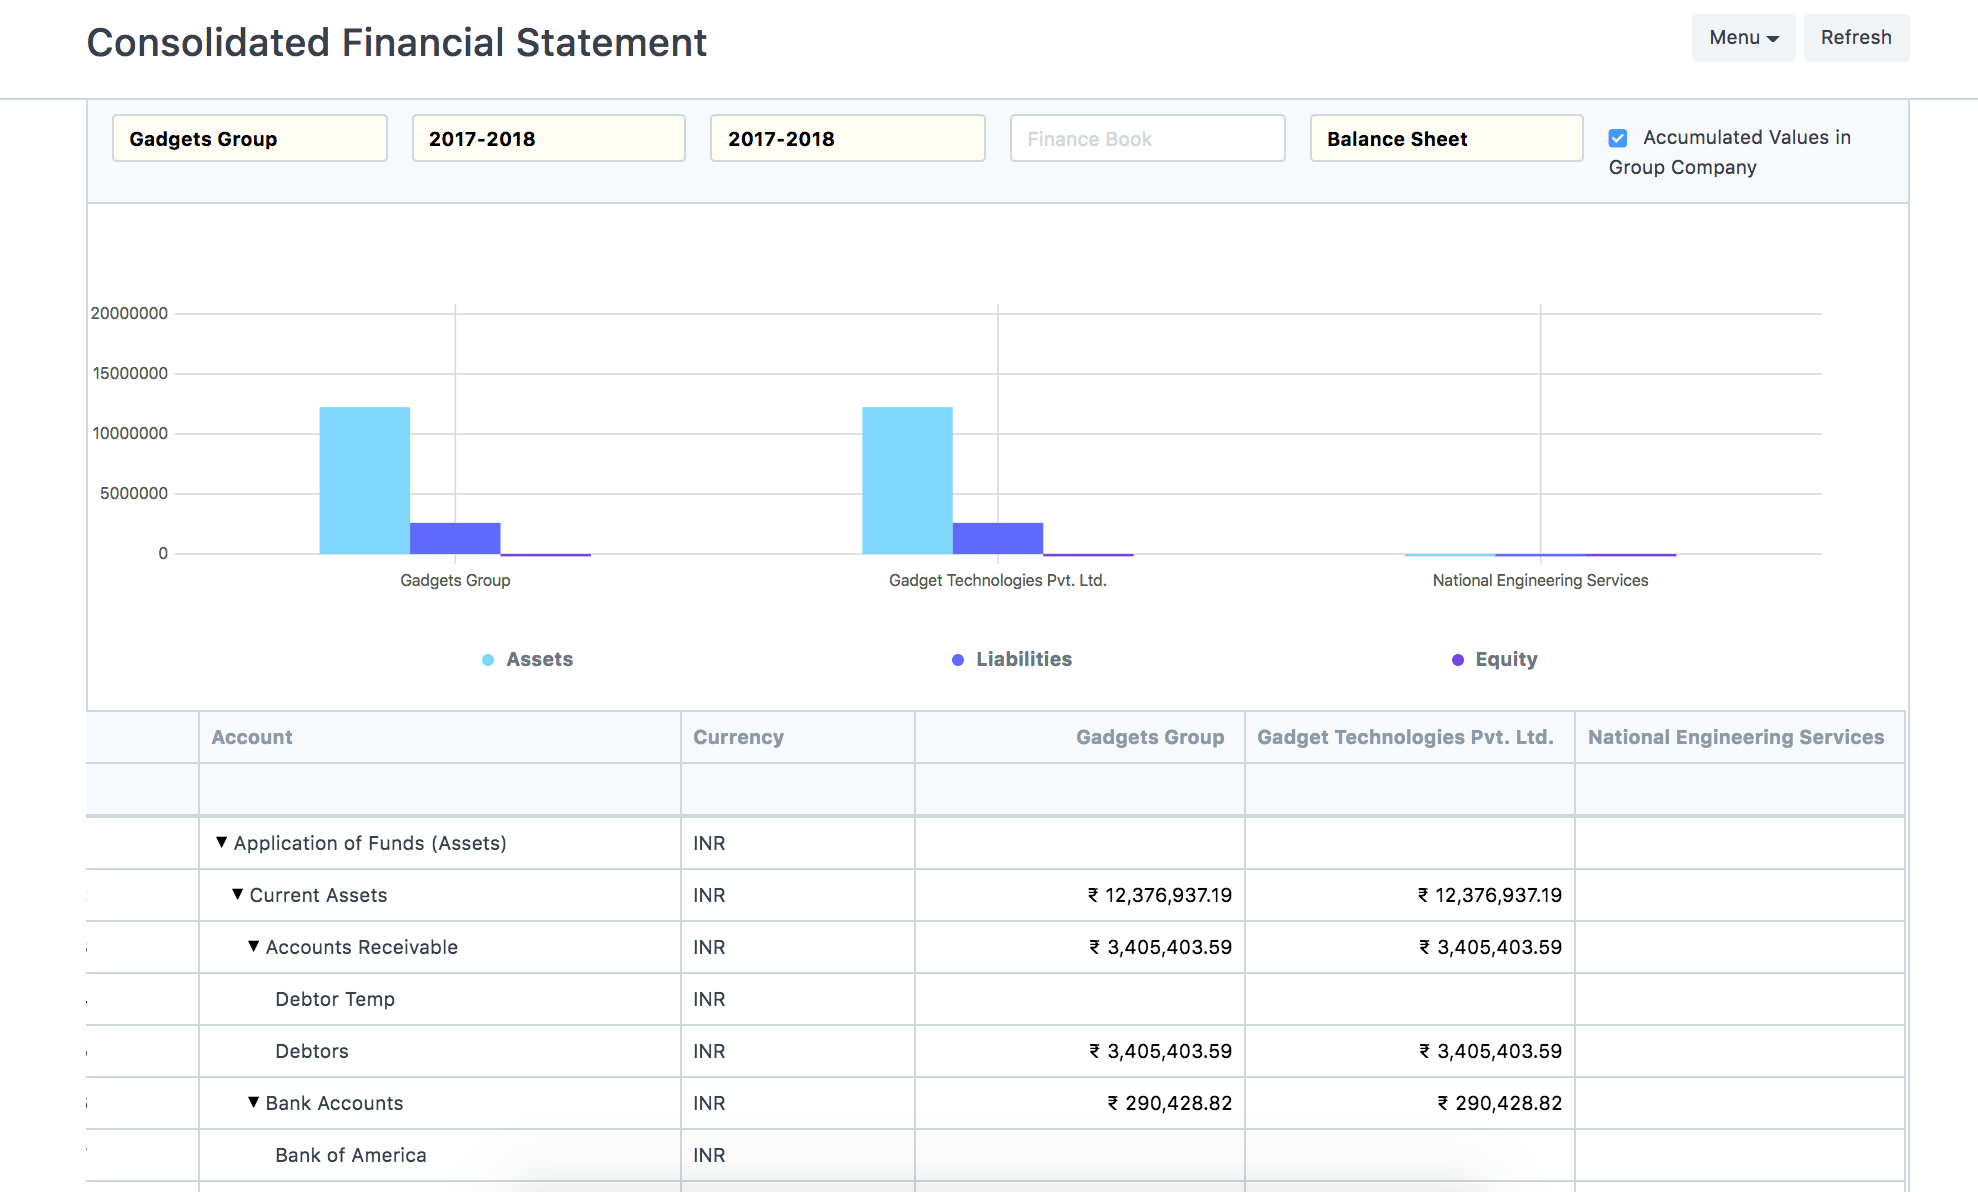 Consolidated Financial Statement